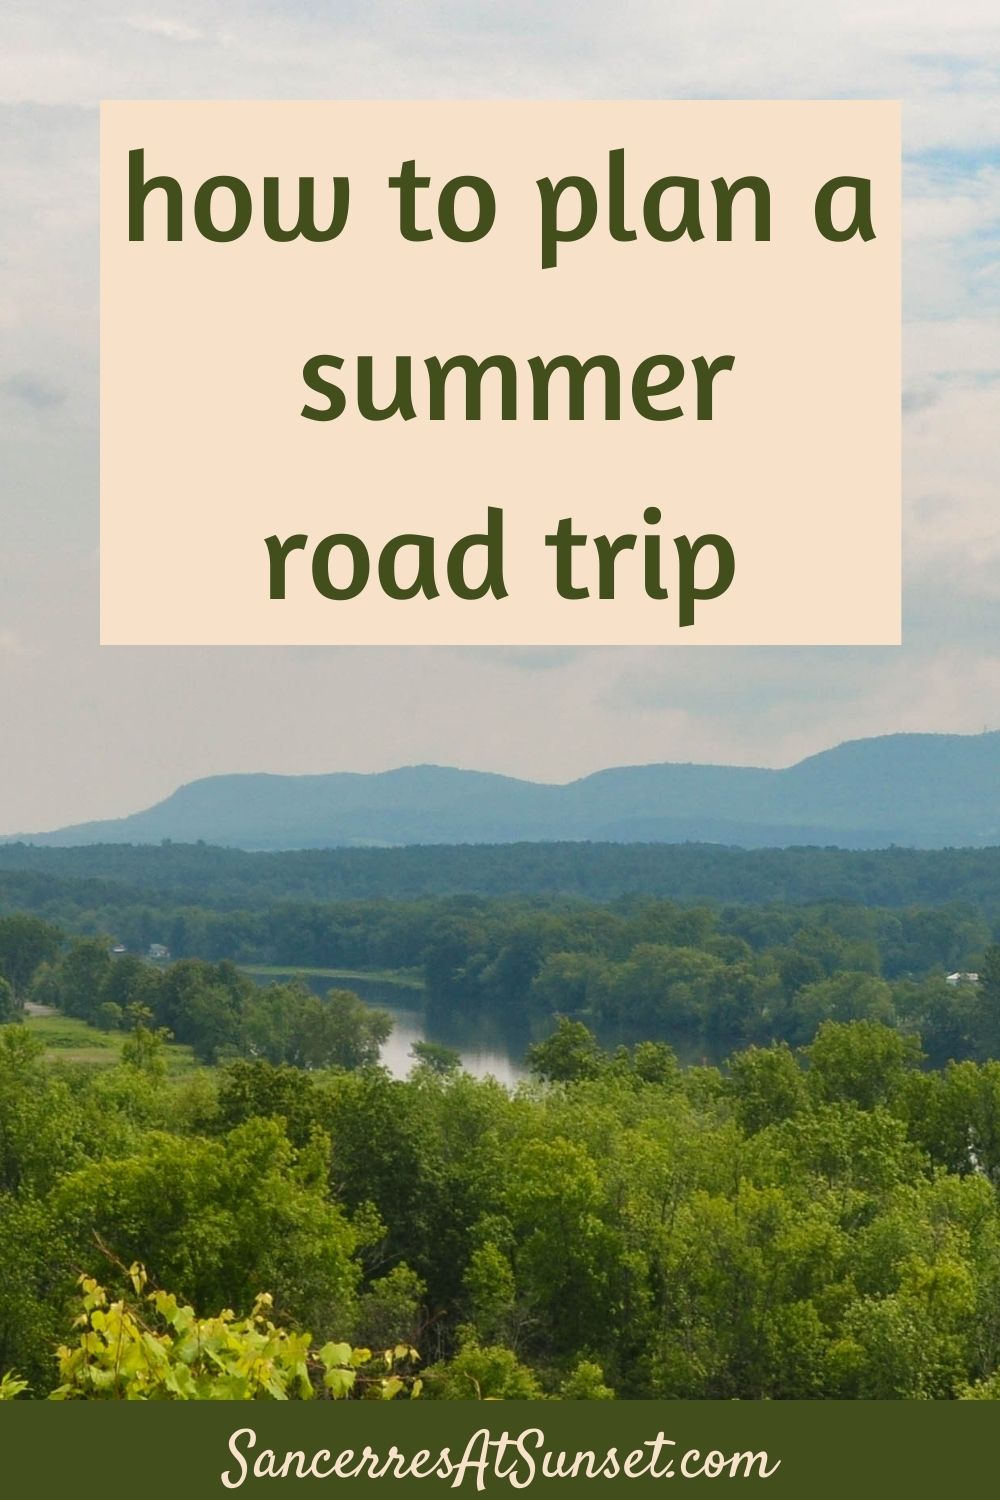 How to Plan a Summer Road Trip